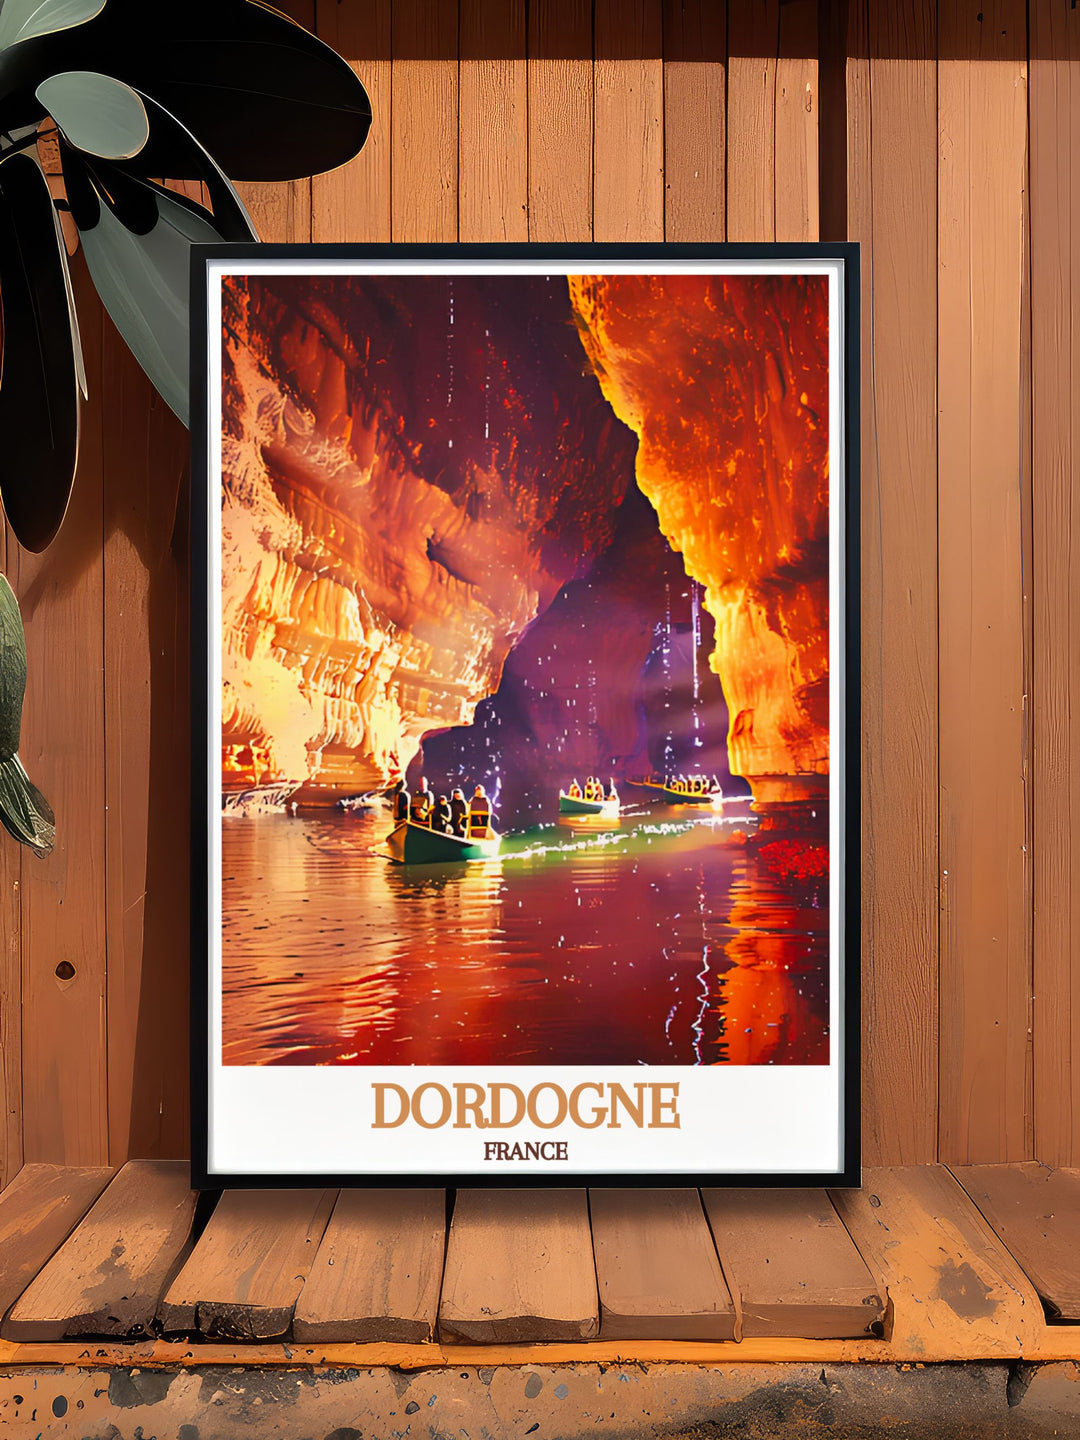 The serene beauty of the Dordogne Valley is beautifully illustrated in this travel poster, capturing its tranquil waterways and scenic vistas, perfect for enhancing your living space.